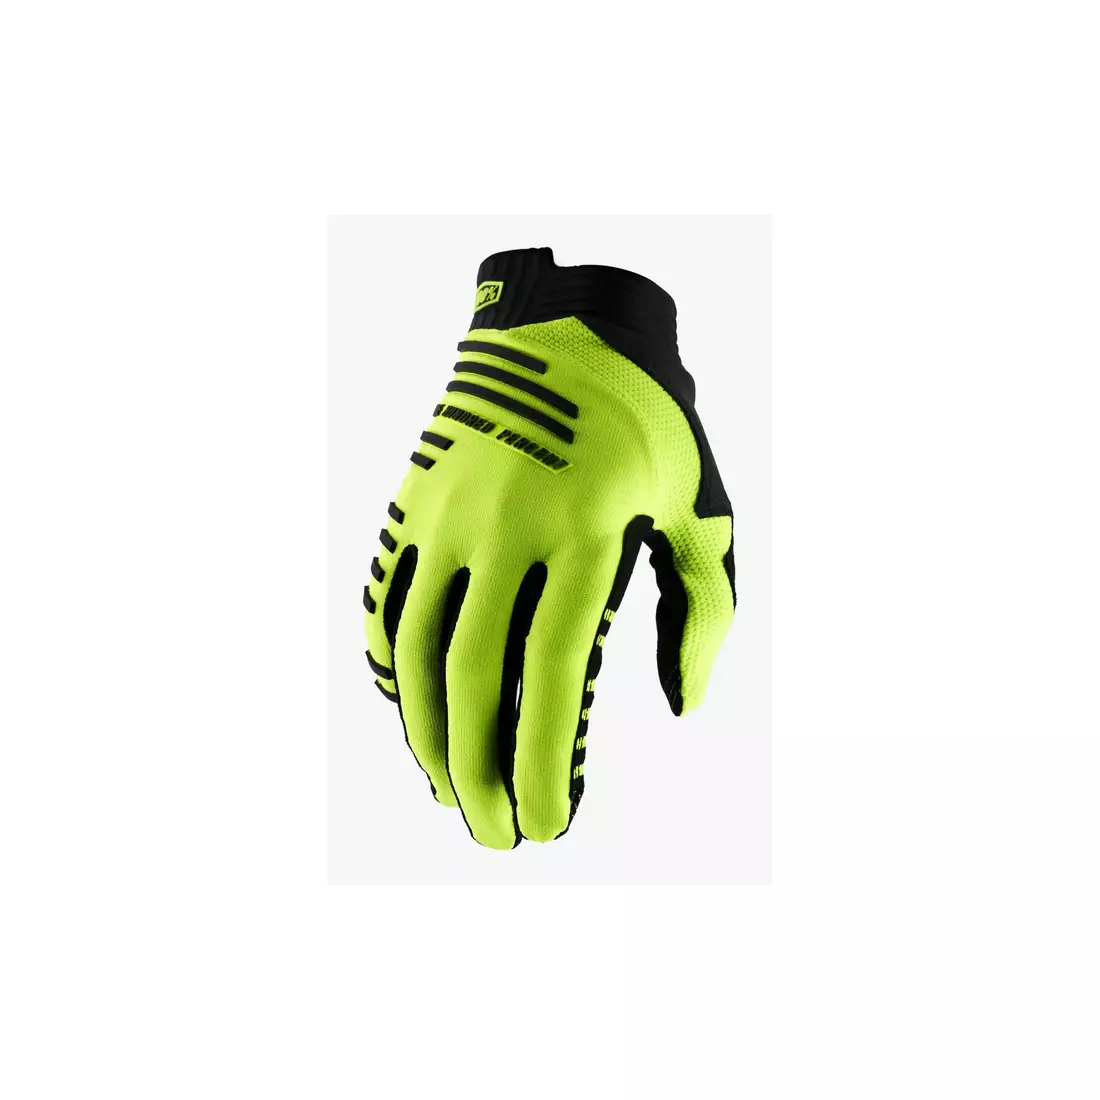 100% men's cycling gloves R-CORE fluo yellow STO-10017-004-12